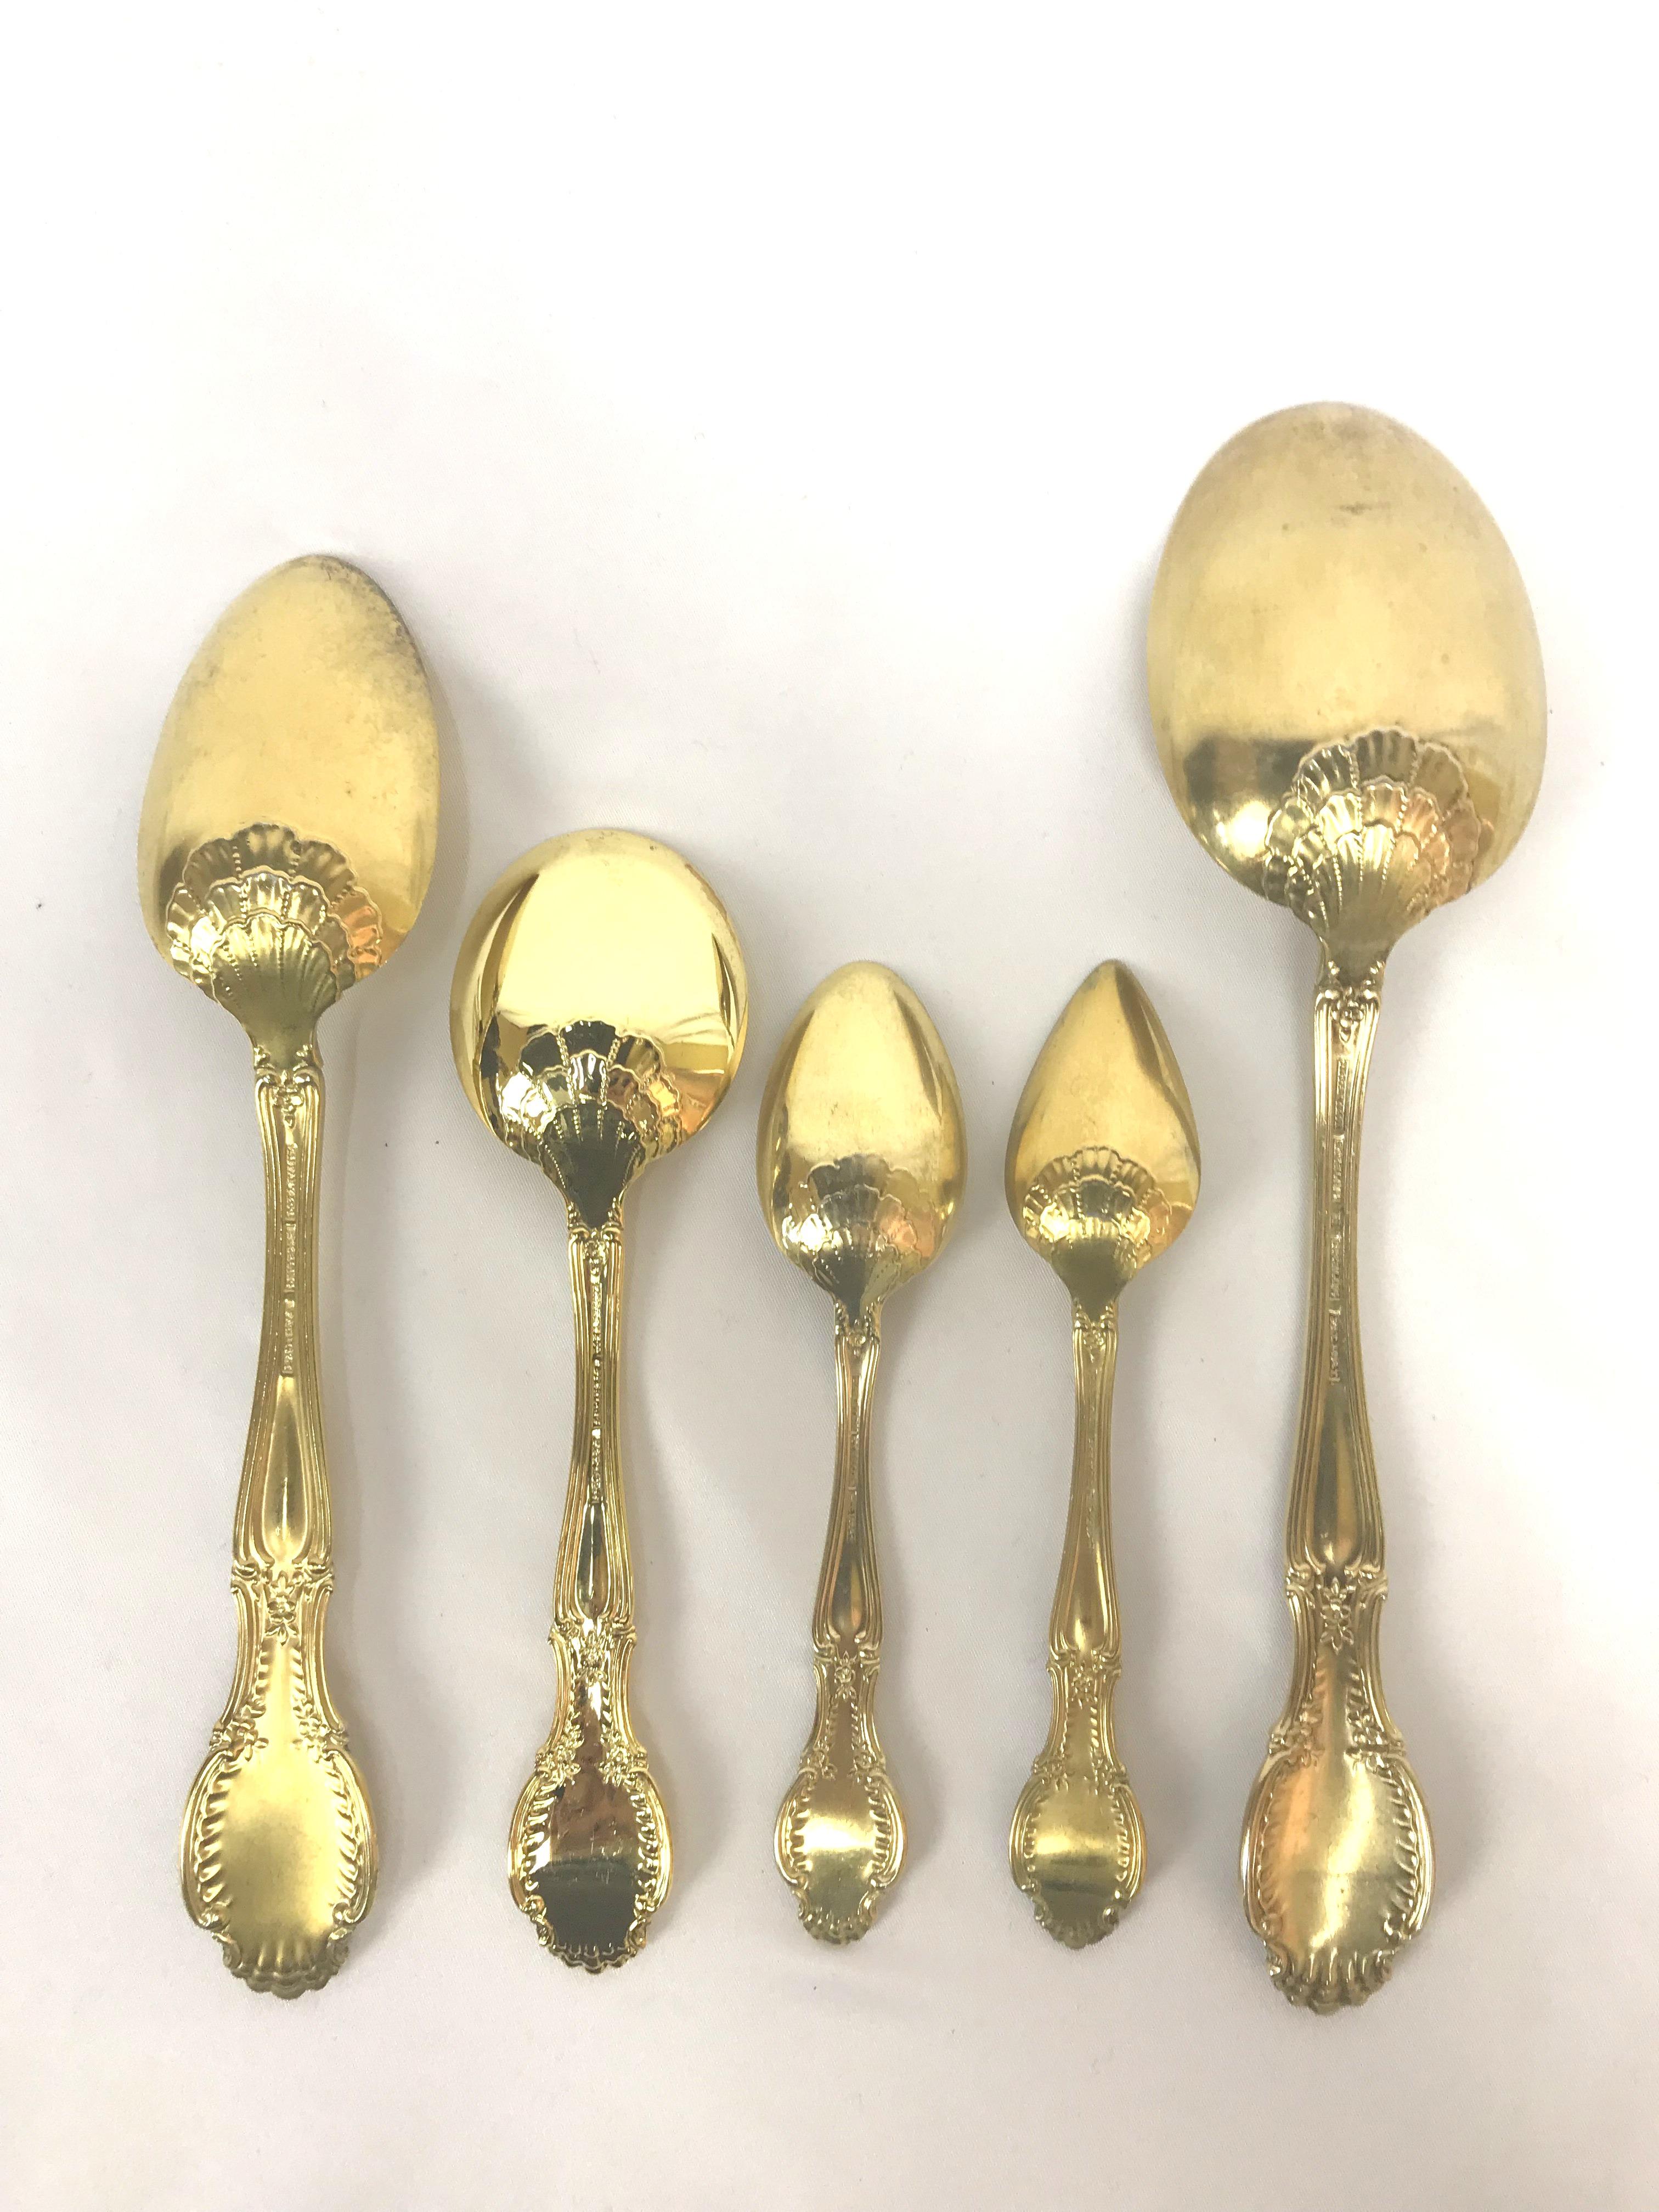 Richelieu Gold Vermeil by Tiffany Sterling Silver Flatware, 196 Pieces 9